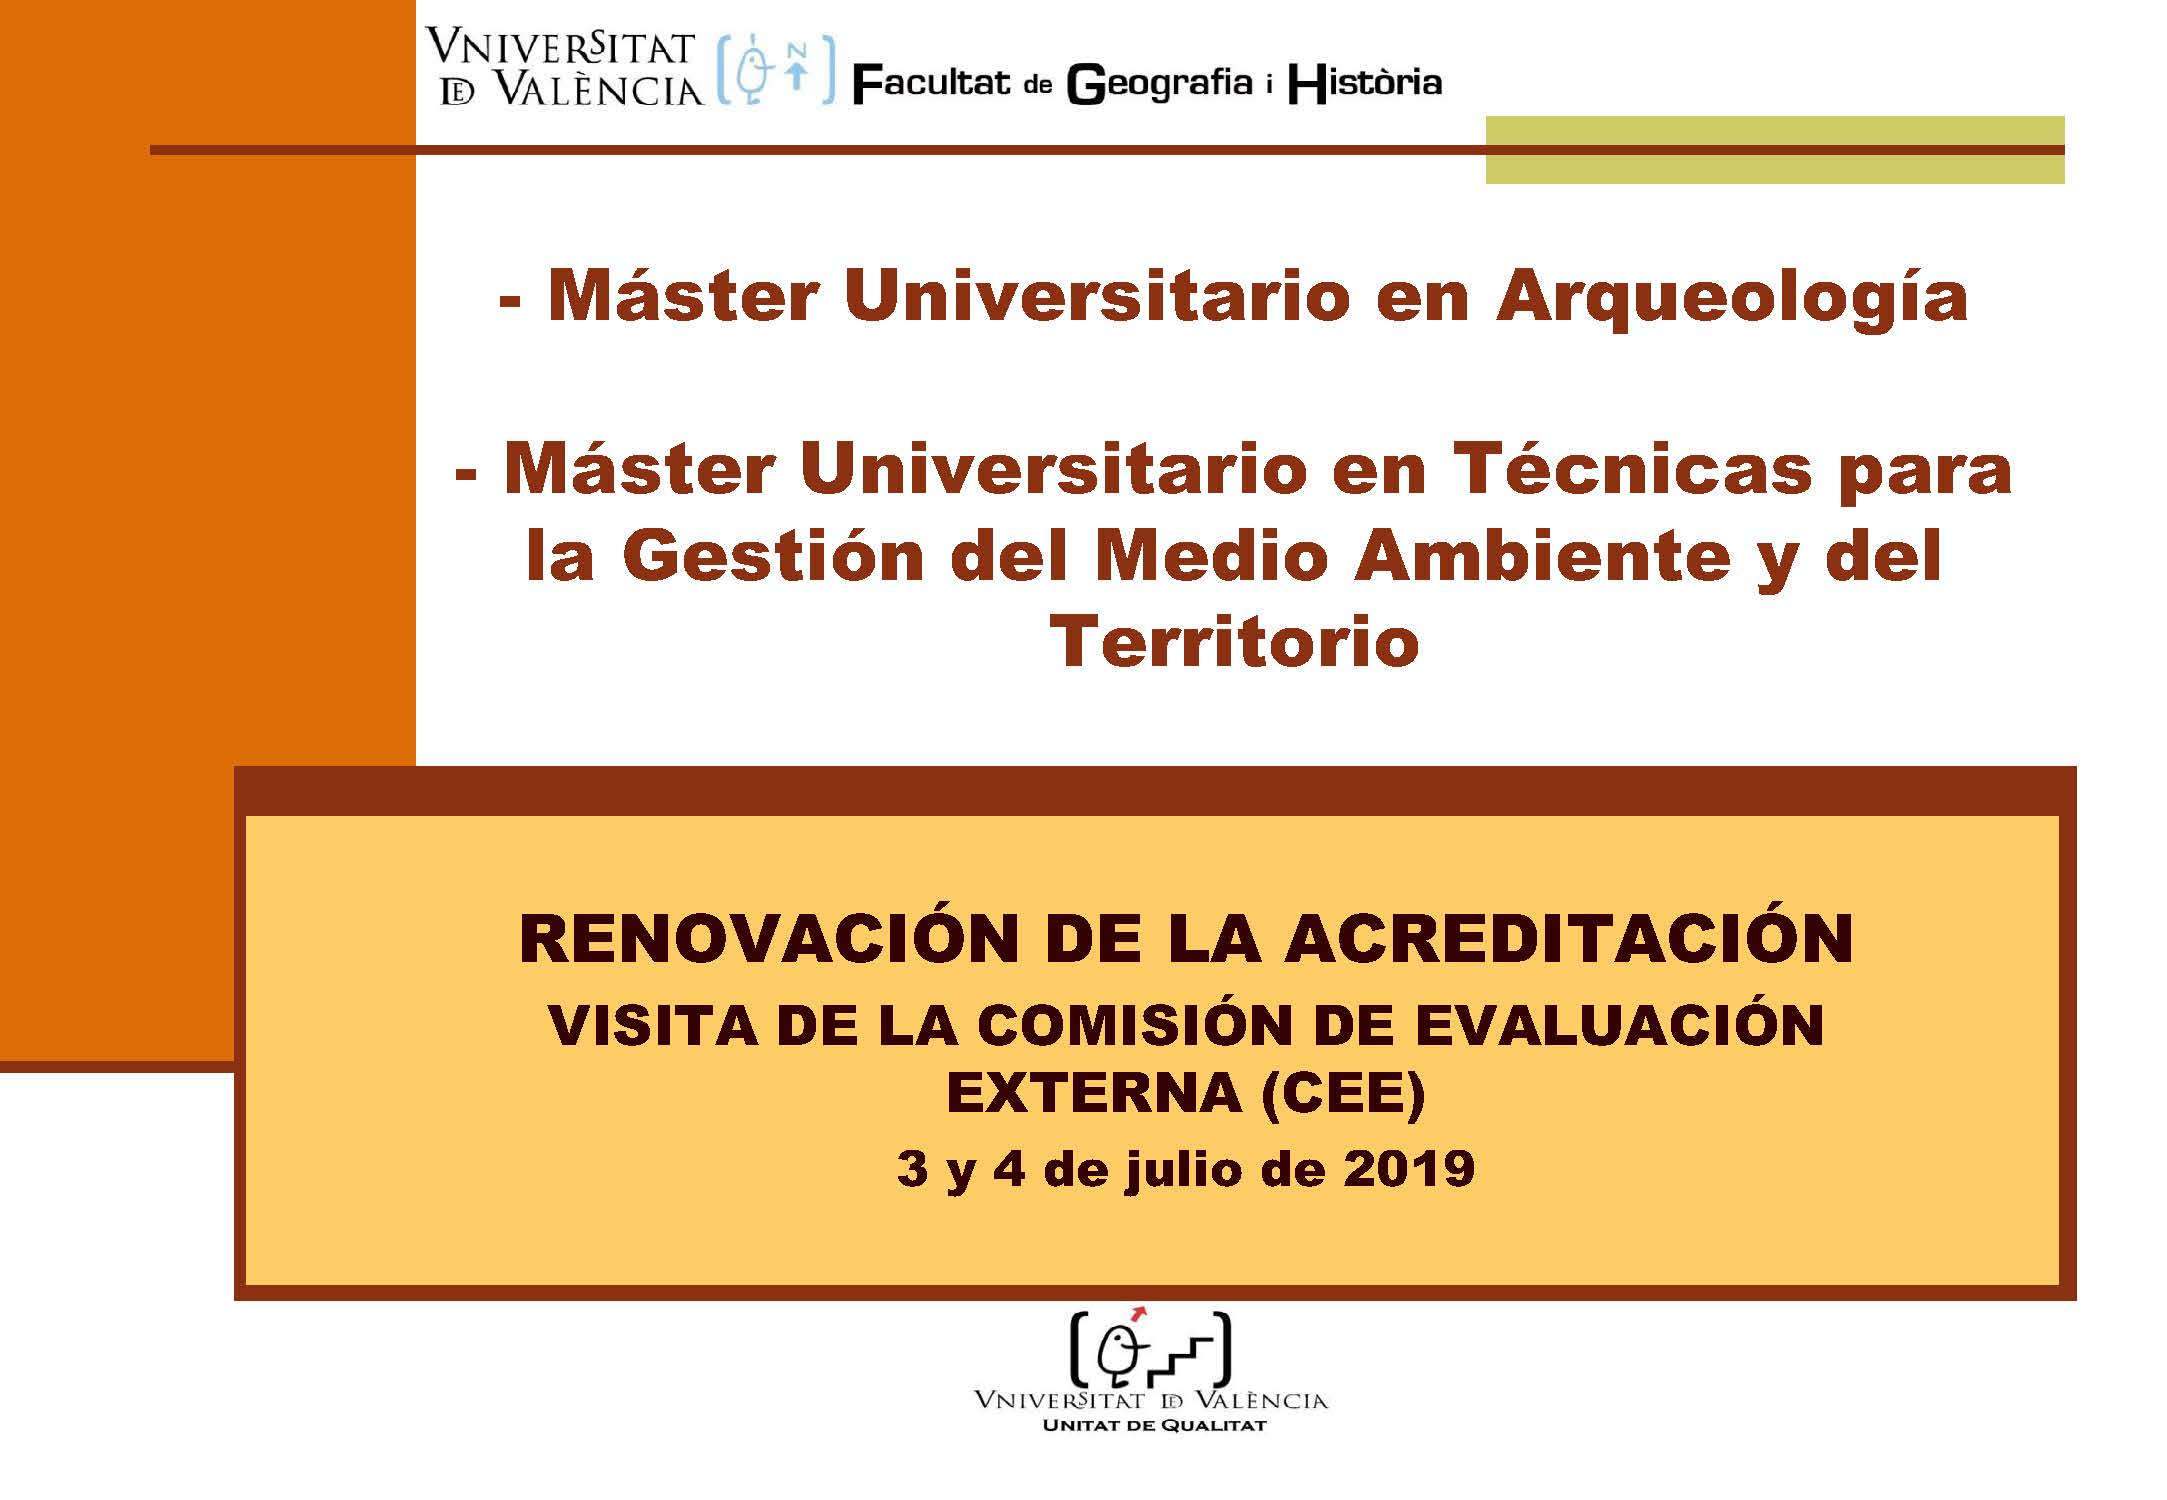 RENEWAL OF THE ACCREDITATION OF MASTERS IN ARCHEOLOGY AND TECHNIQUES FOR ENVIRONMENTAL AND TERRITORY MANAGEMENT